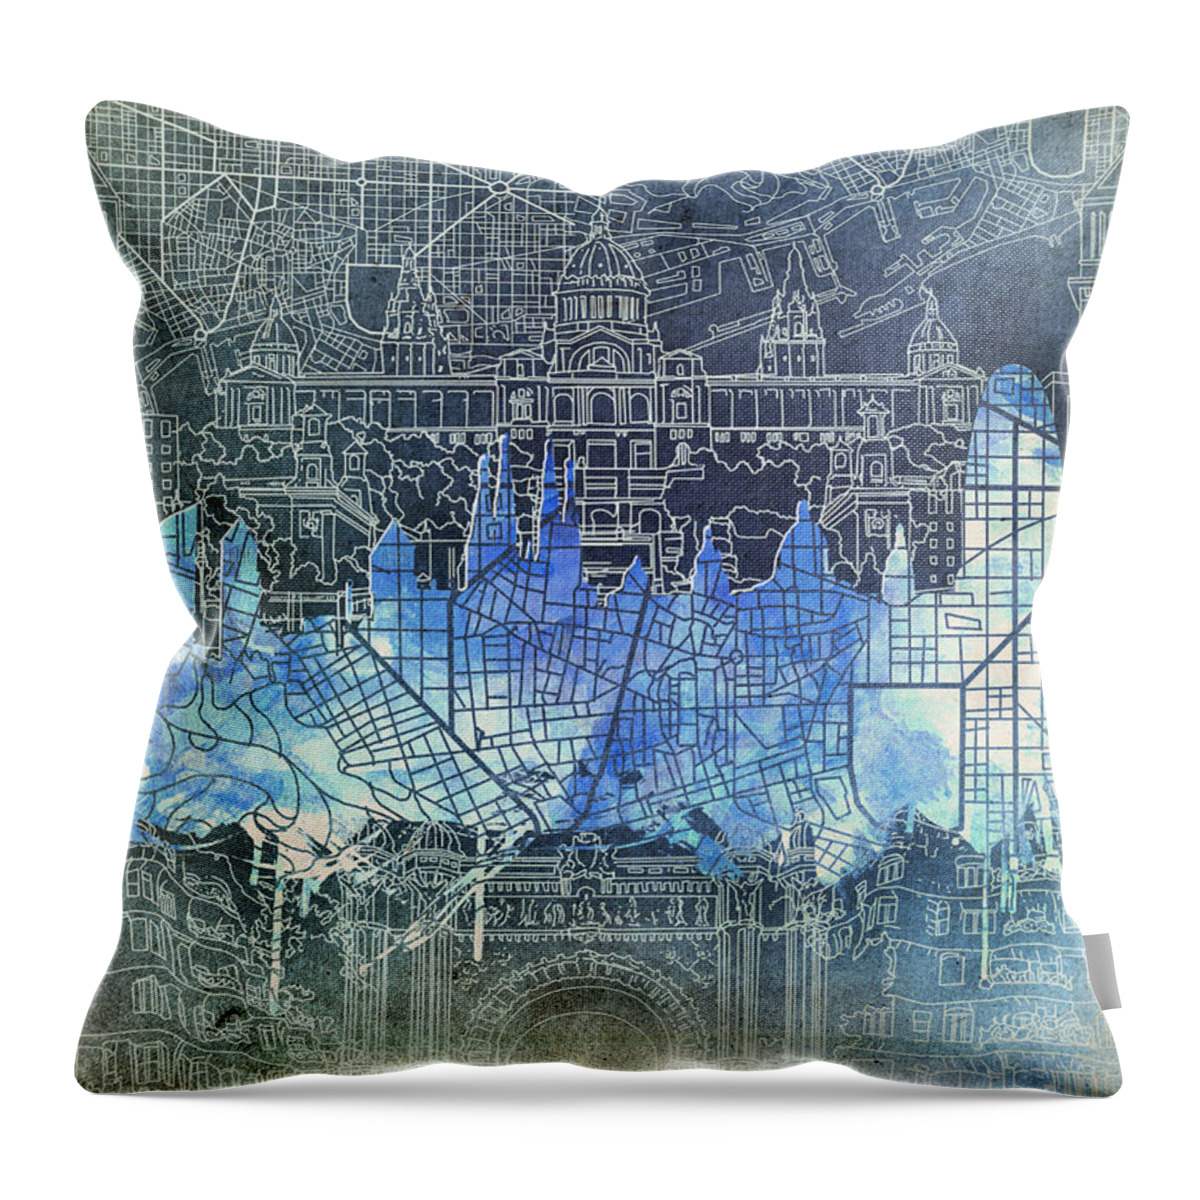 Barcelona Throw Pillow featuring the painting Barcelona Skyline Vintage by Bekim M